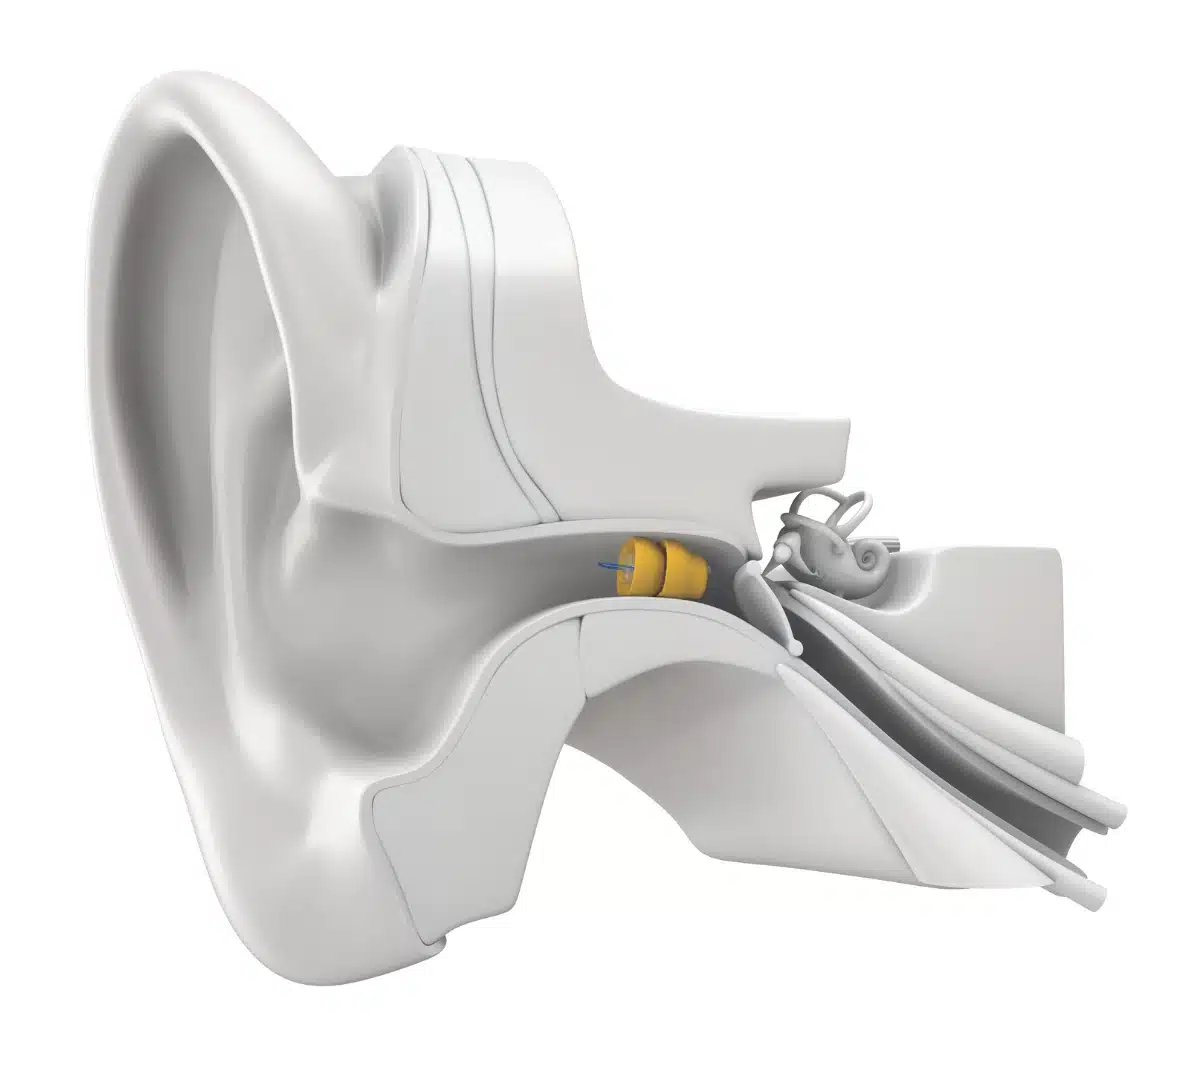 Lyric in ear model features Invisability